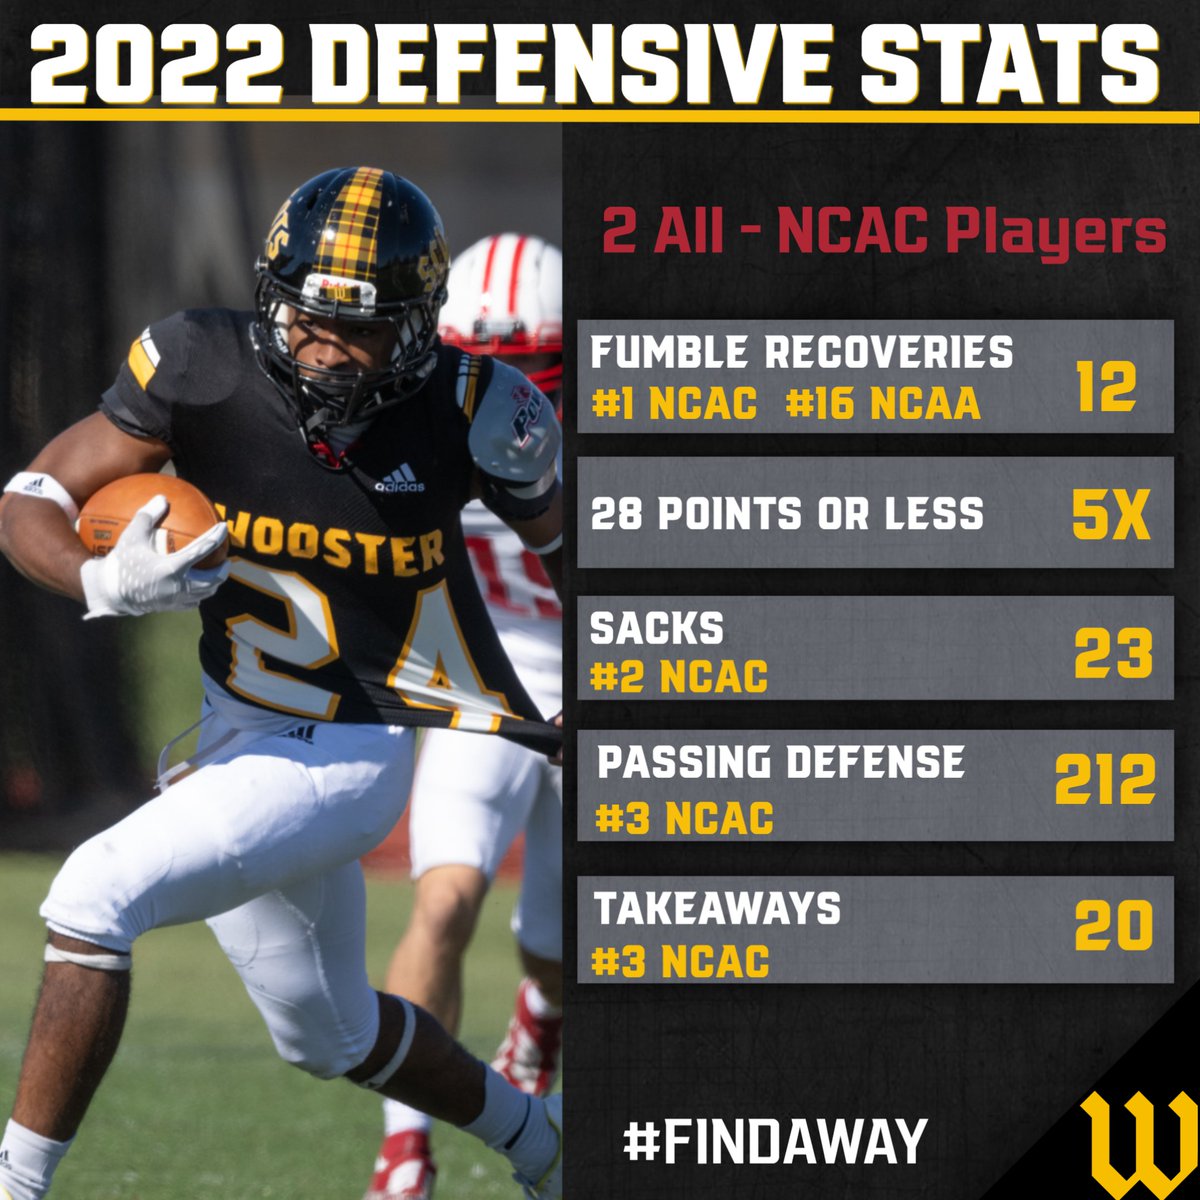 Here are some Defensive Stats from the 2022 Fighting Scots! #GoScots #D3FB #NCACFB